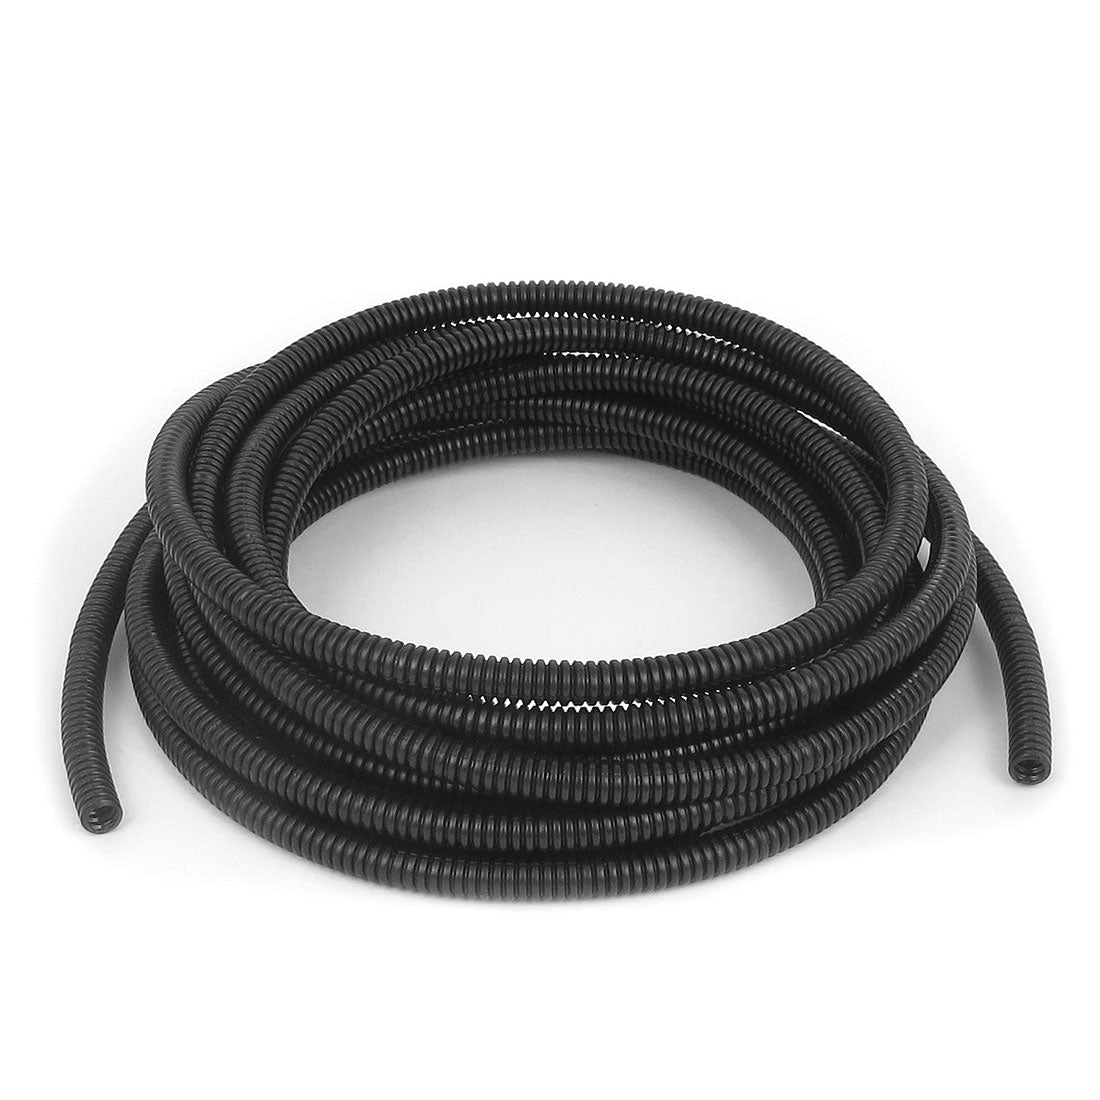 uxcell Uxcell 4.2 M 5 x 7 mm Plastic Flexible Corrugated Conduit Tube for Garden,Office Black